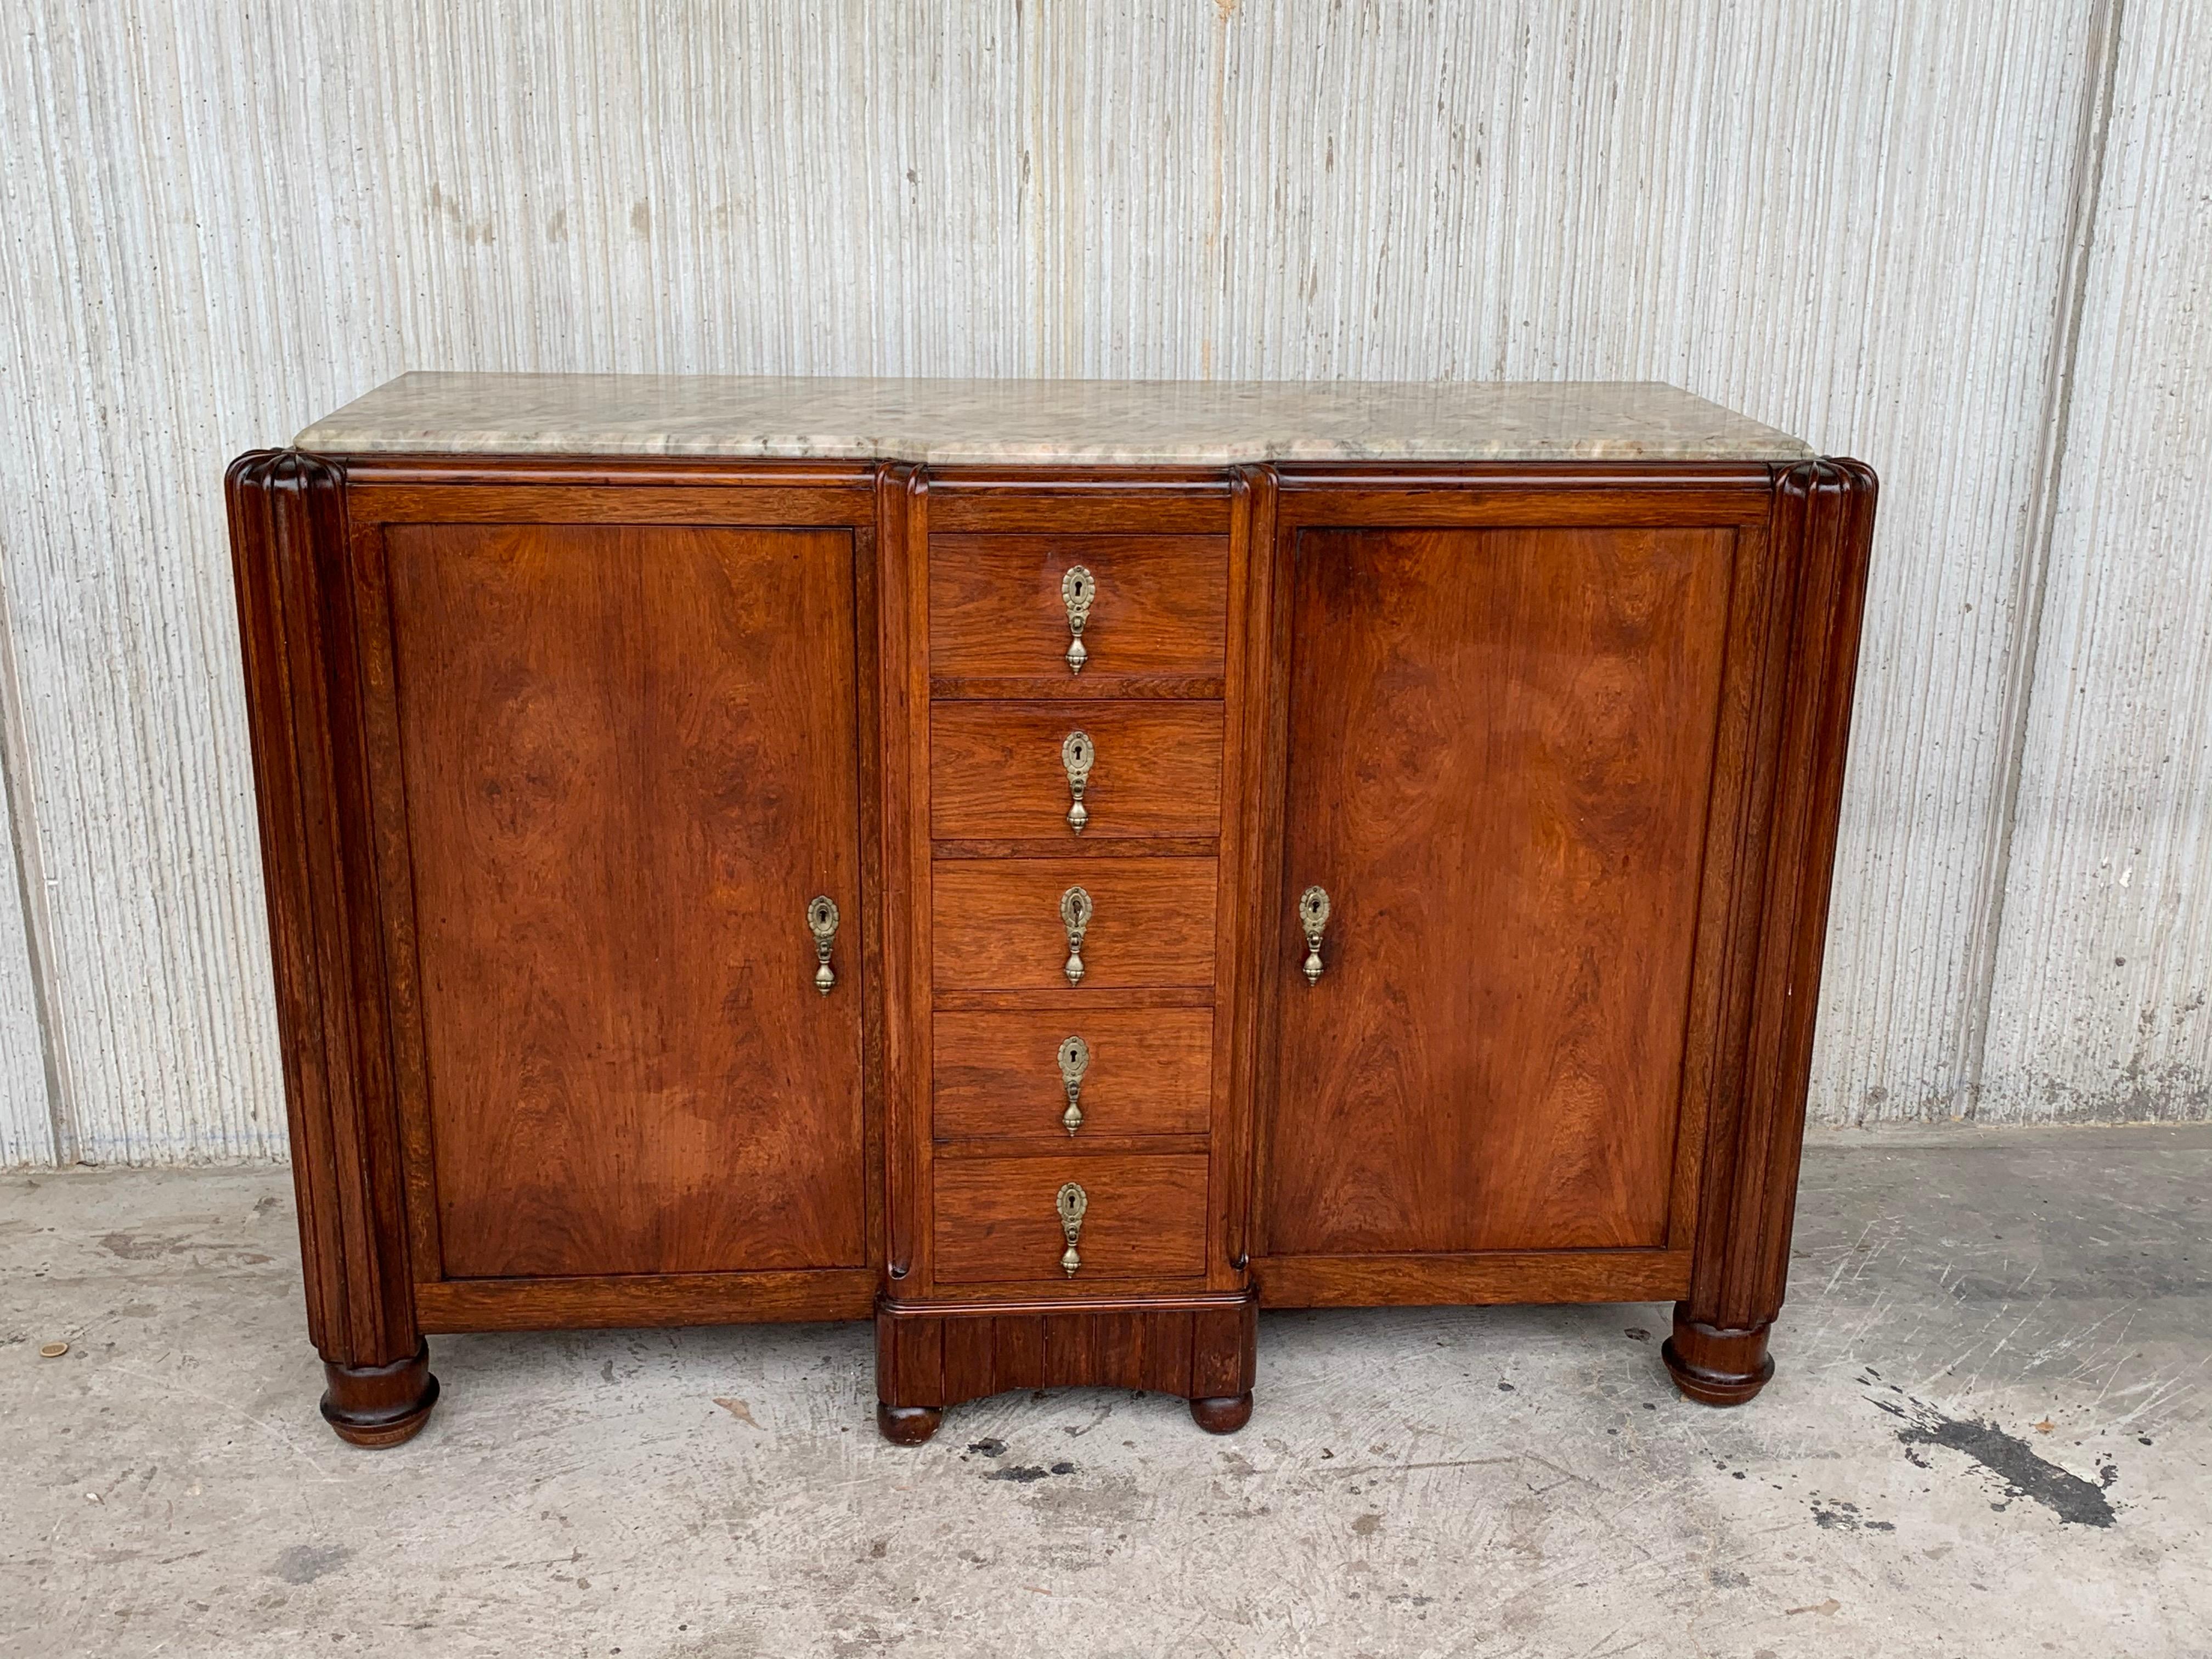 An Art Deco sideboard with burr walnut wood and marble top, with satin fluted columns in both sides and banding. Five integral central drawers with original moss green handles.

We have a matching big one.